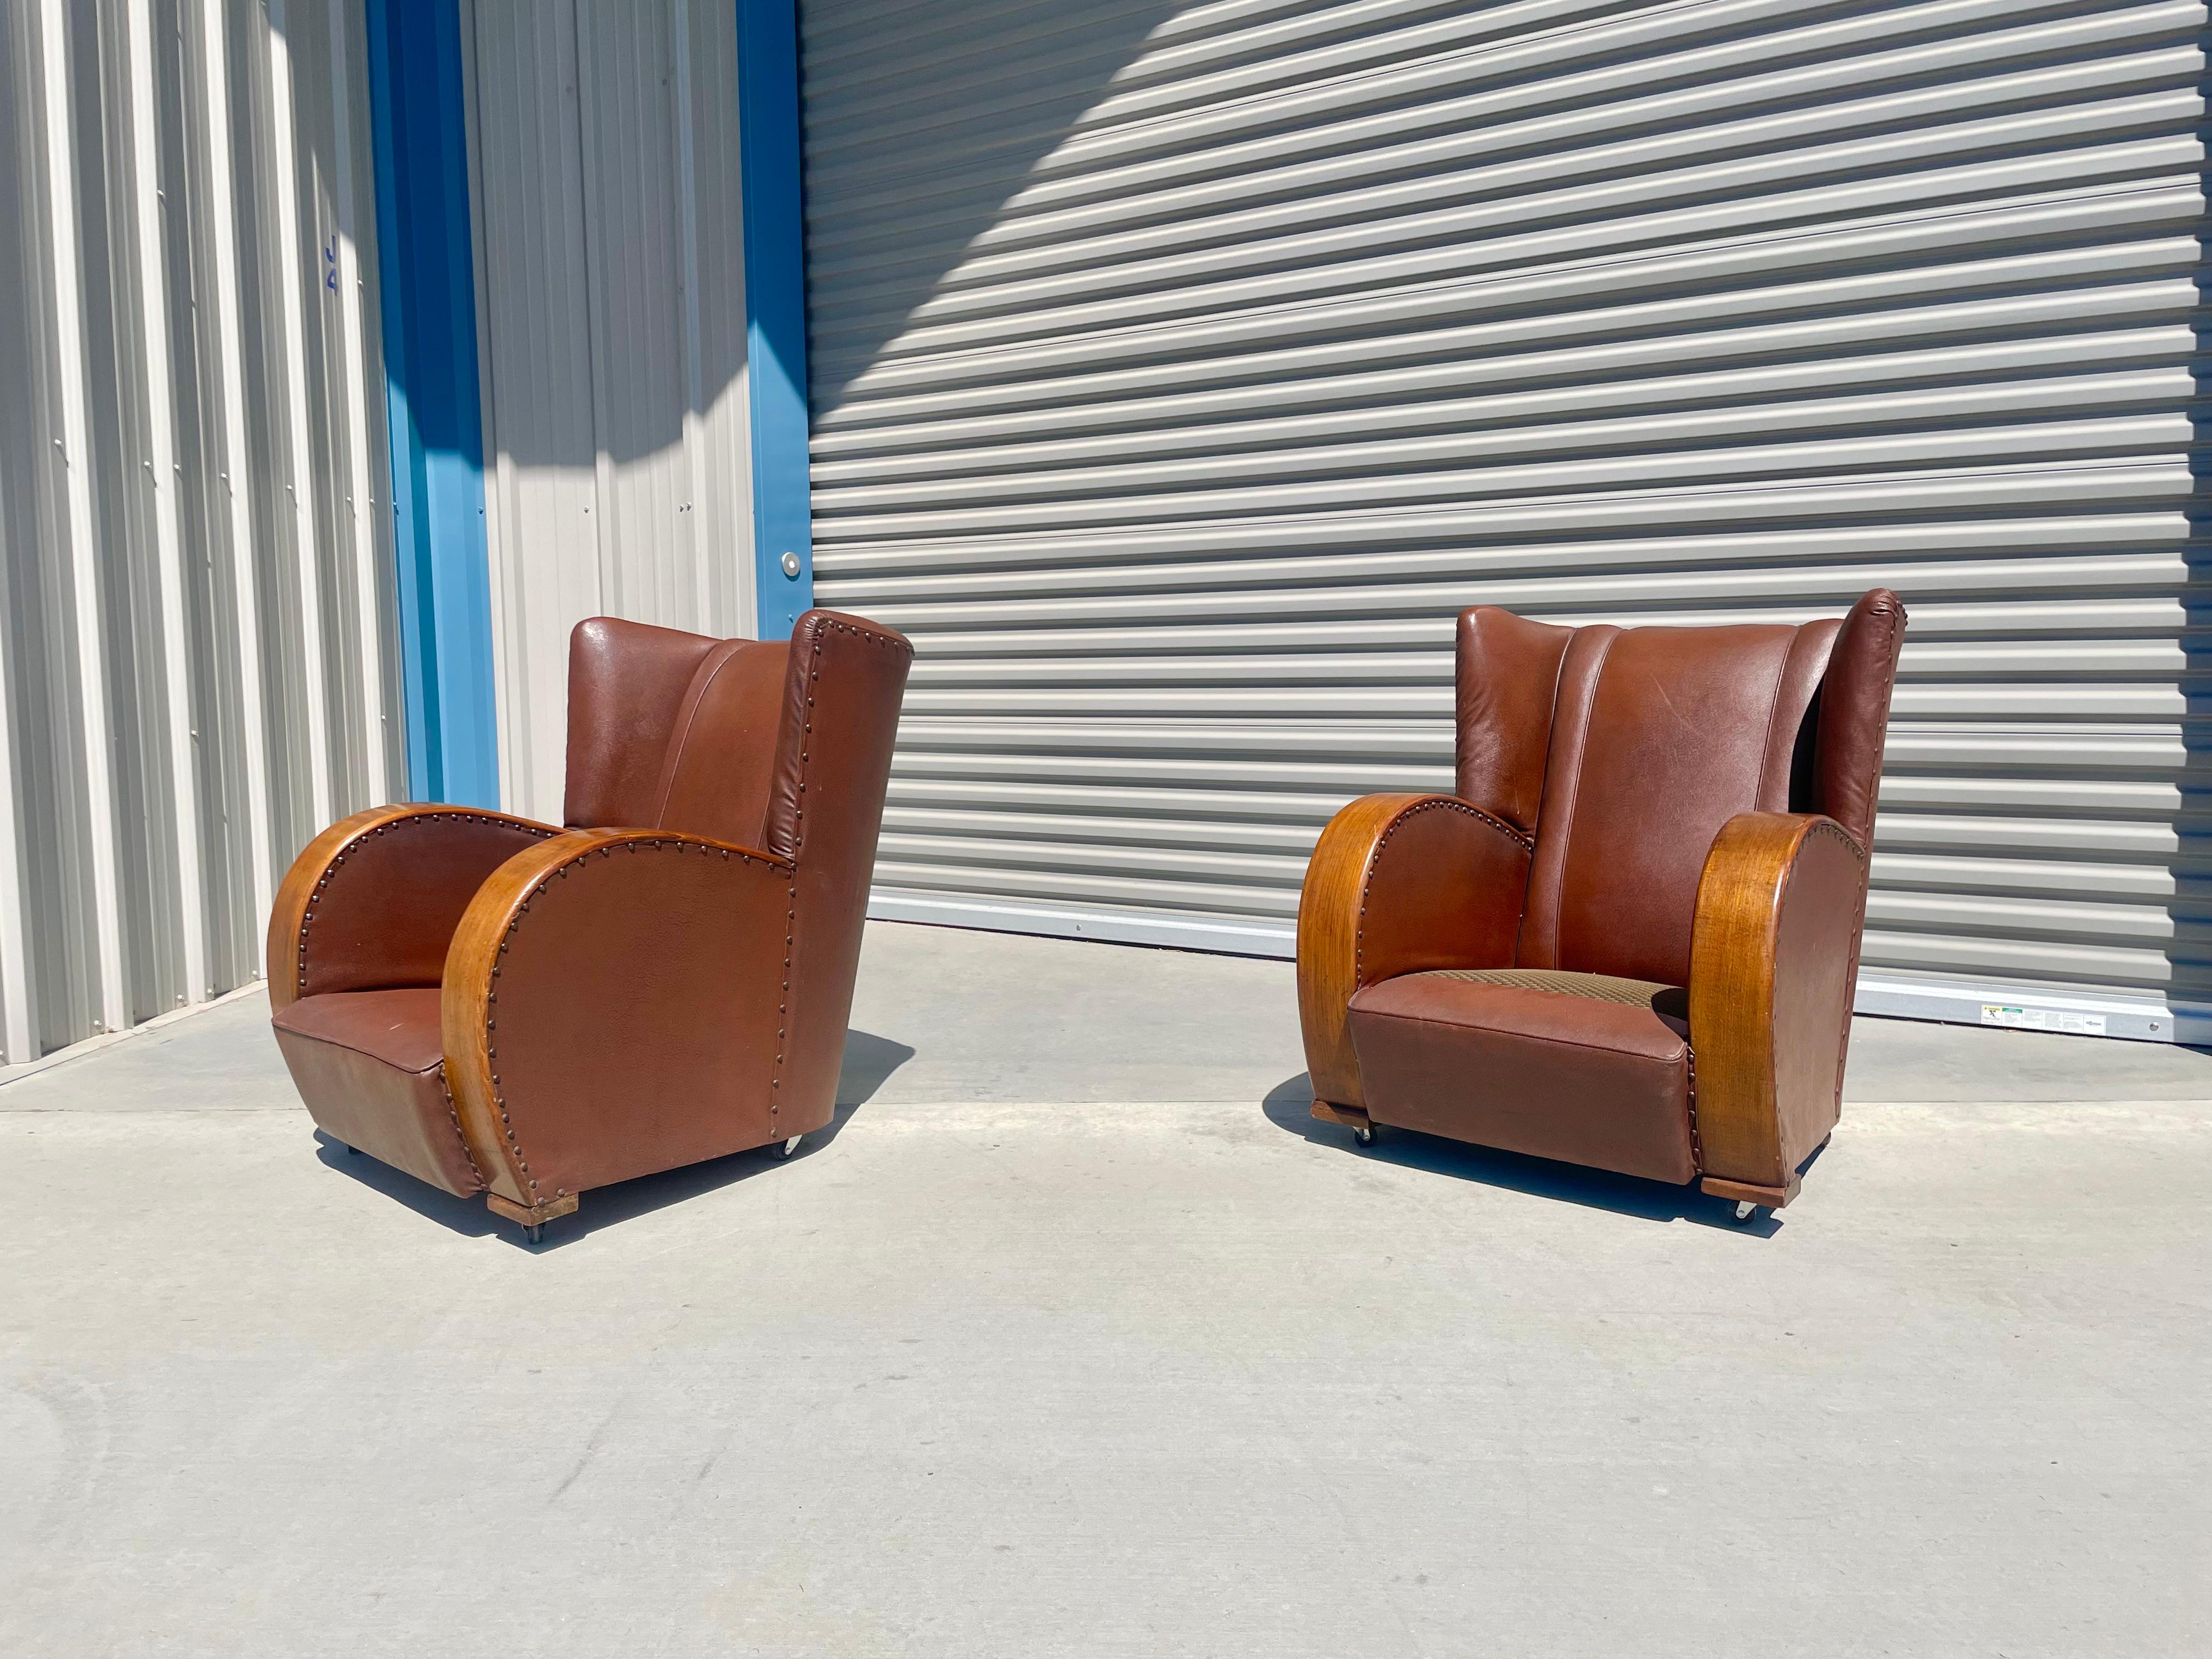 Vintage Art Deco leather lounge chairs manufactured in the United States, circa 1970s. These beautiful lounge chairs feature two-barrel armrests leading down, giving them a tremendously distinctive design for their era. The lounge chairs also